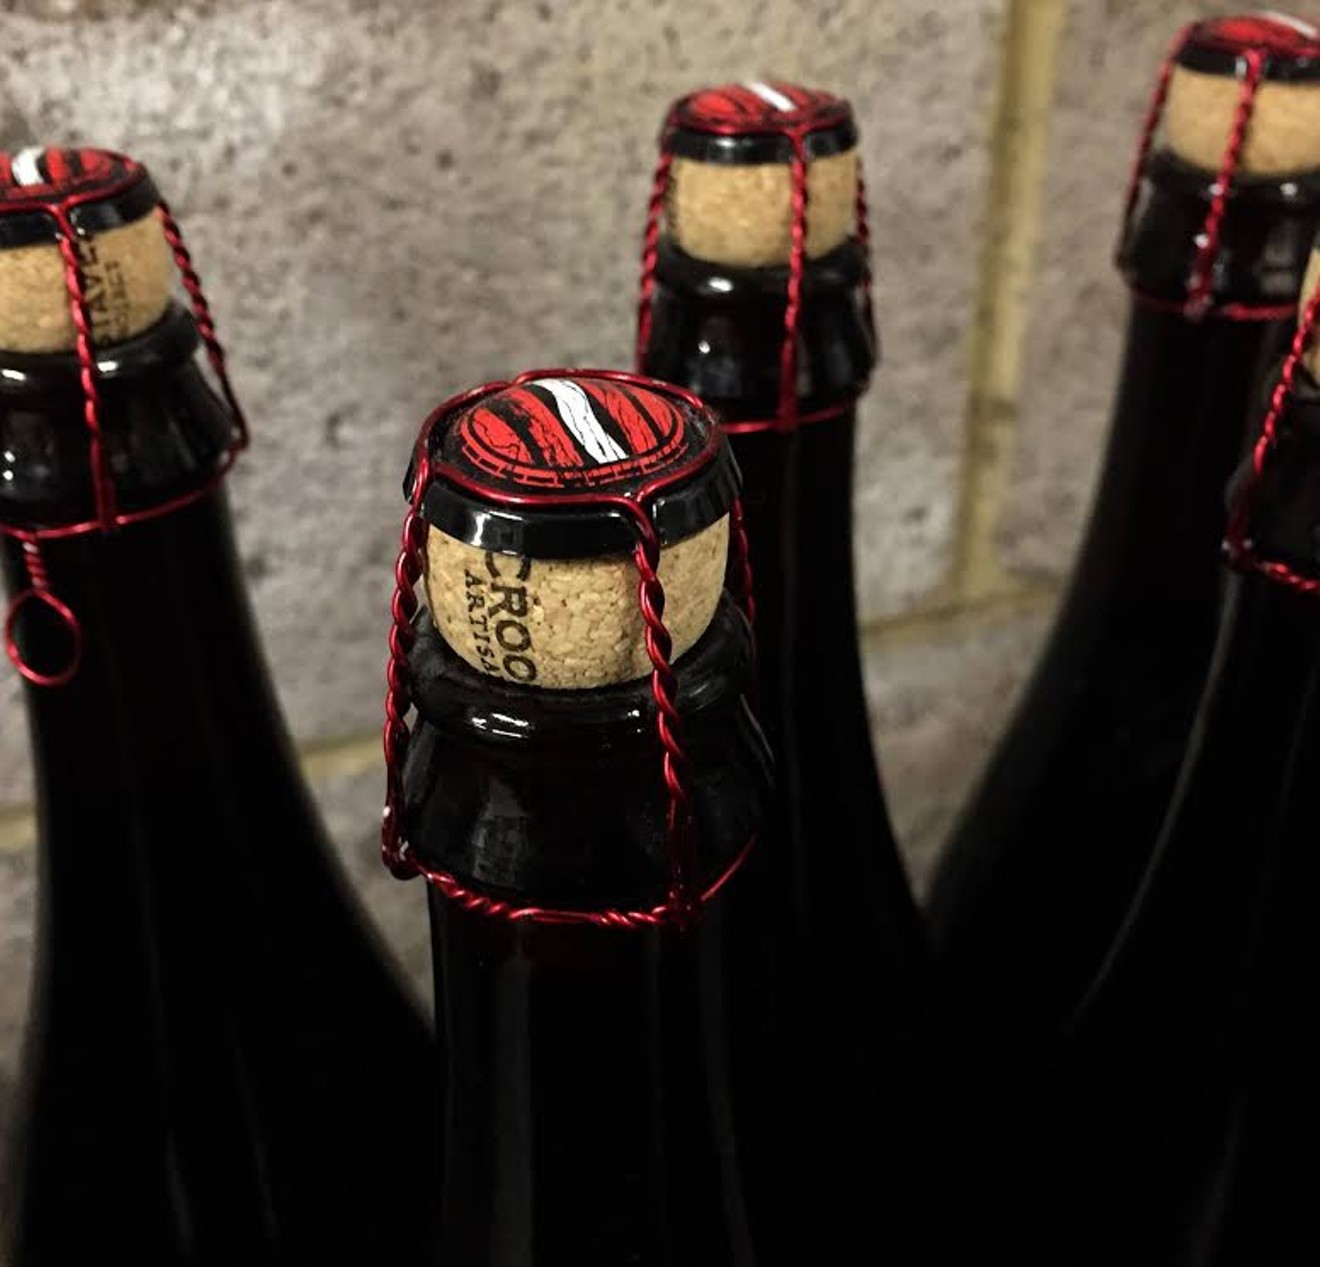 Crooked Stave is moving to cork-and-cage bottles.